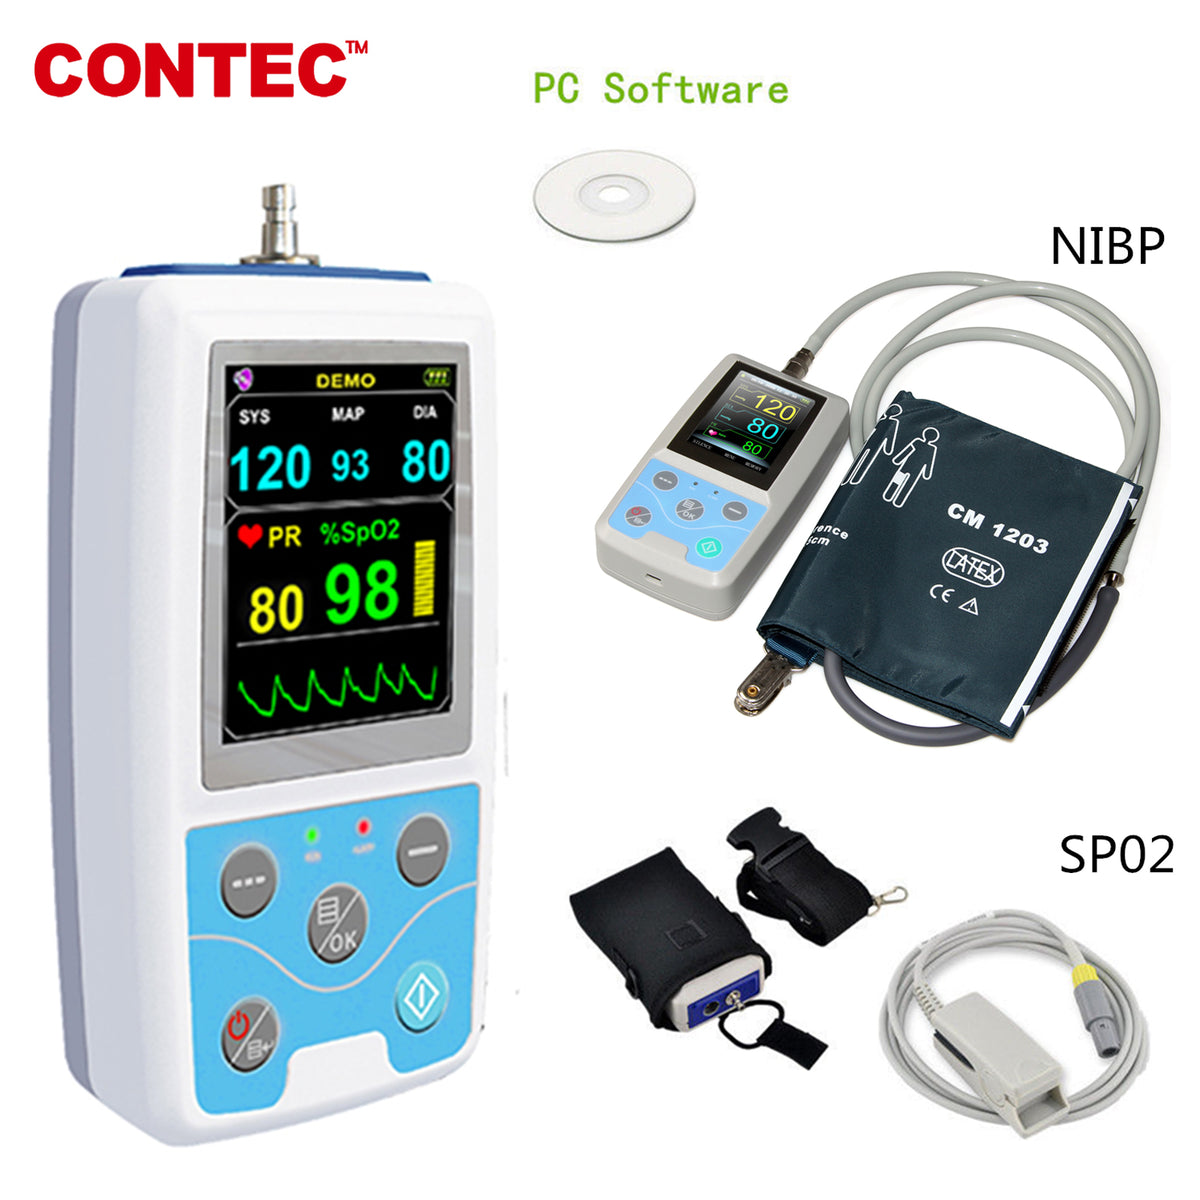 Continuous blood pressure patient monitor - CNAP® Monitor - CNSystems  Medizintechnik - cardiac output / NIBP / systolic pressure